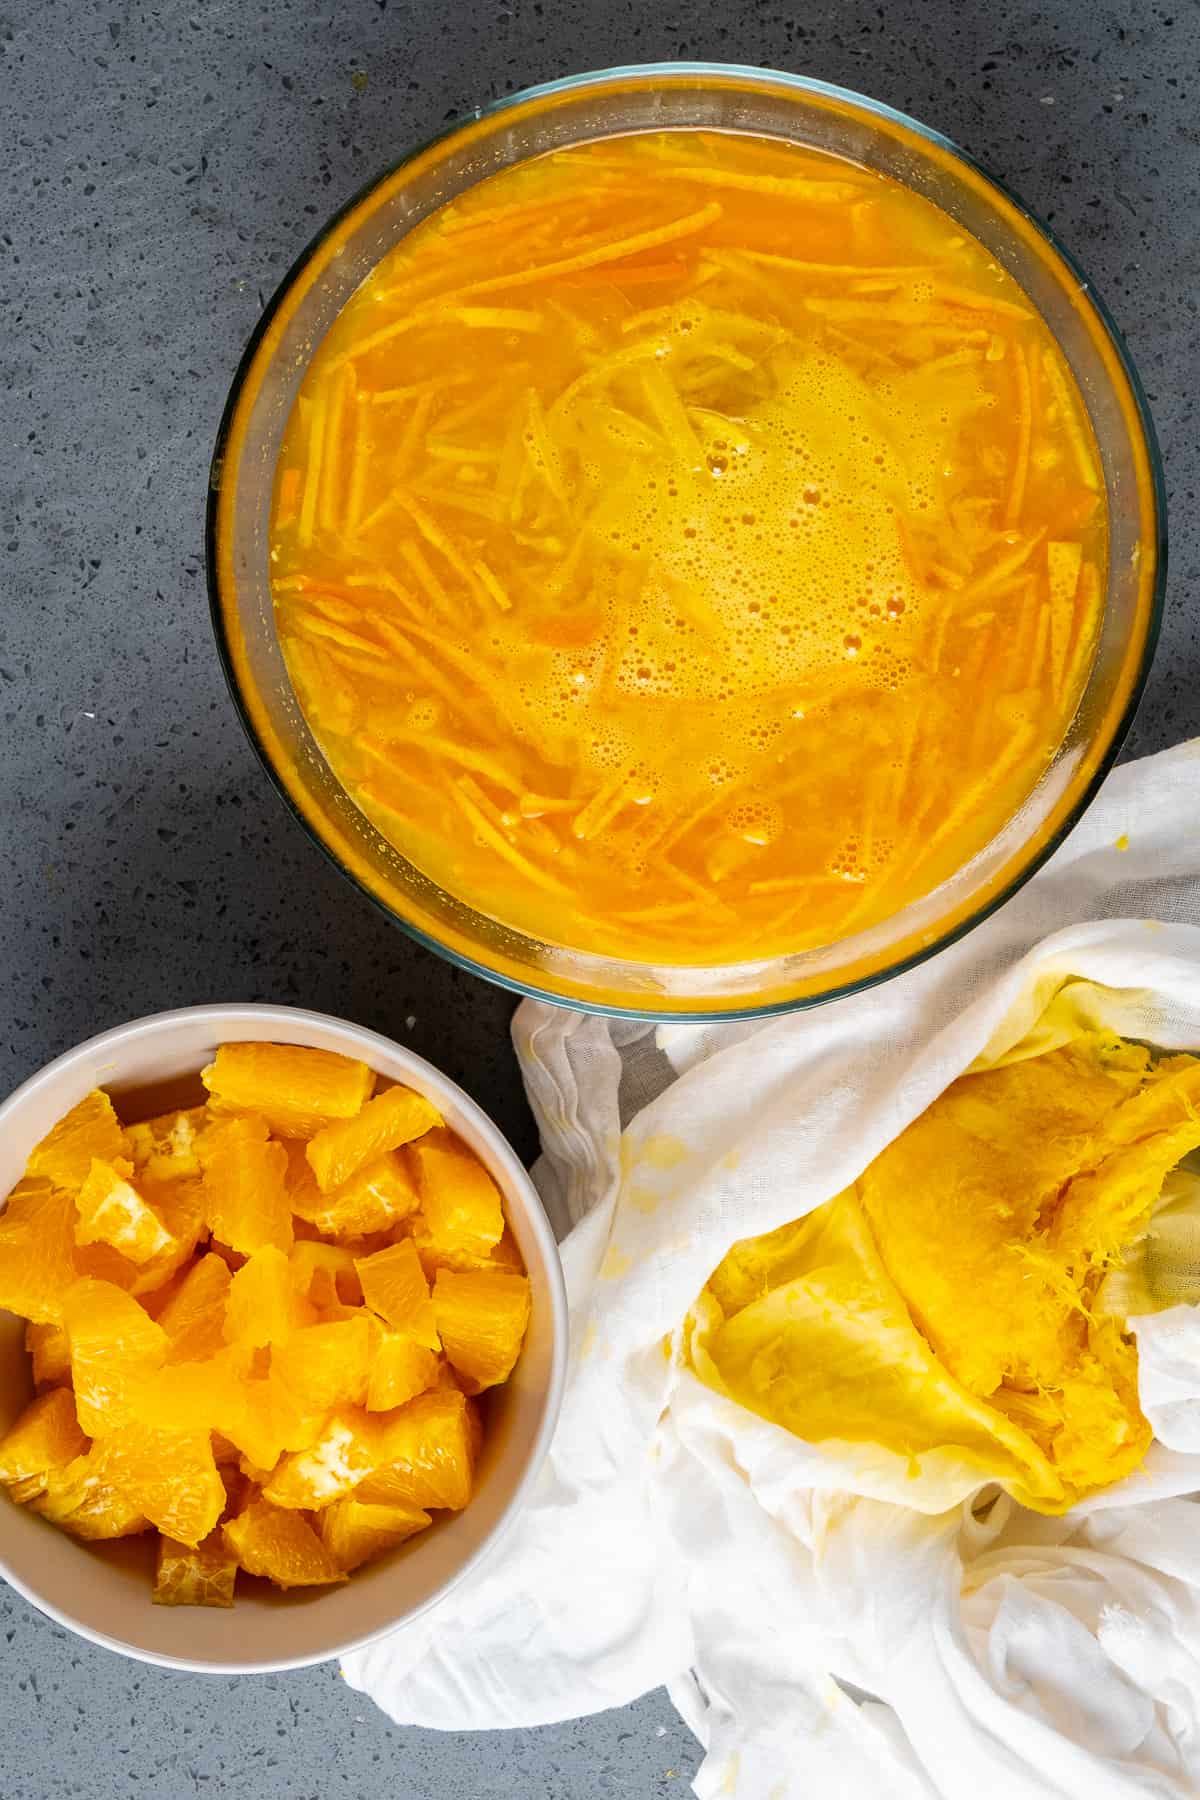 Chopped oranges in a bowl, orange juice and zest slices in another bowl.